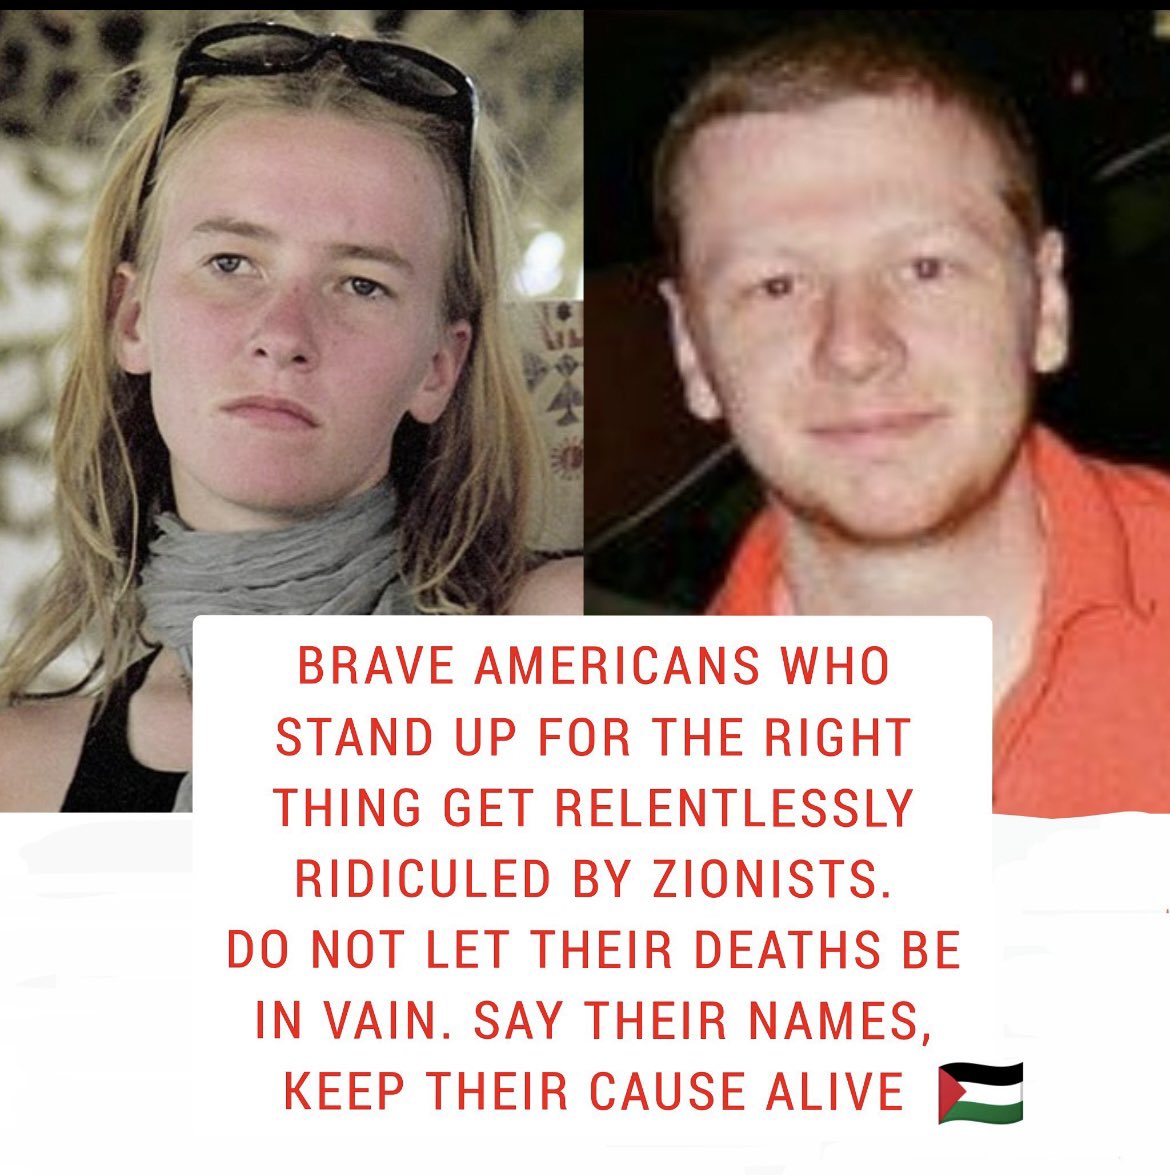 Rachel Corrie and and Aaron Bushnell actually believed in something and were willing to die for their convictions This enrages Zionist demons but we won’t let them die in vain or be forgotten RIP